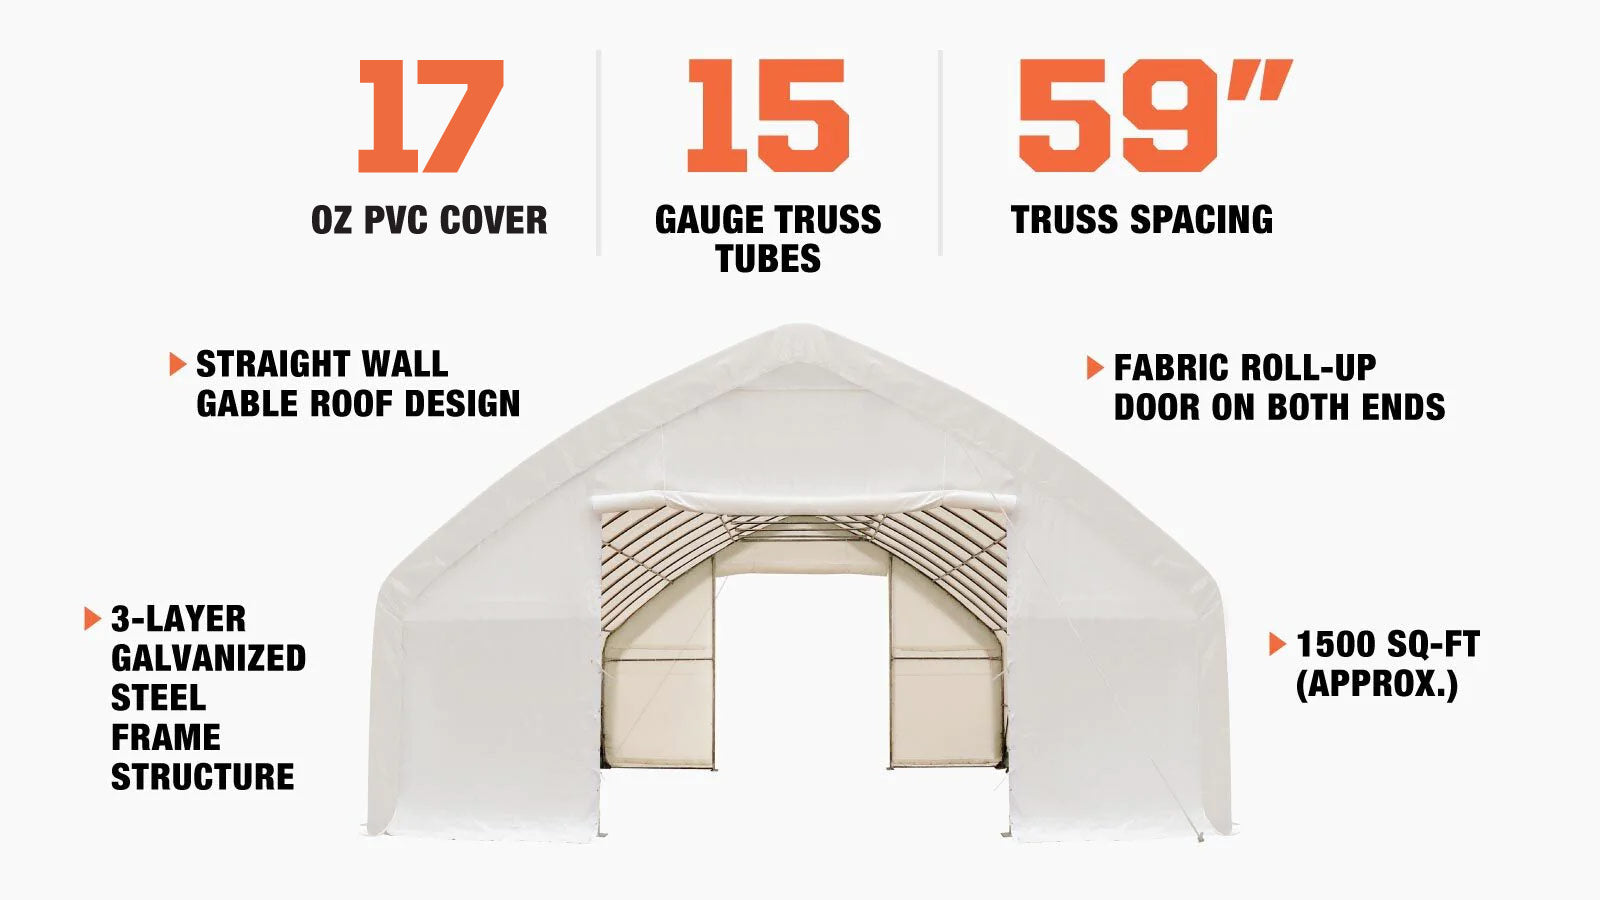 TMG Industrial 30' x 50' Straight Wall Peak Ceiling Storage Shelter with Heavy Duty 17 oz PVC Cover & Drive Through Doors, TMG-ST3050V-description-image